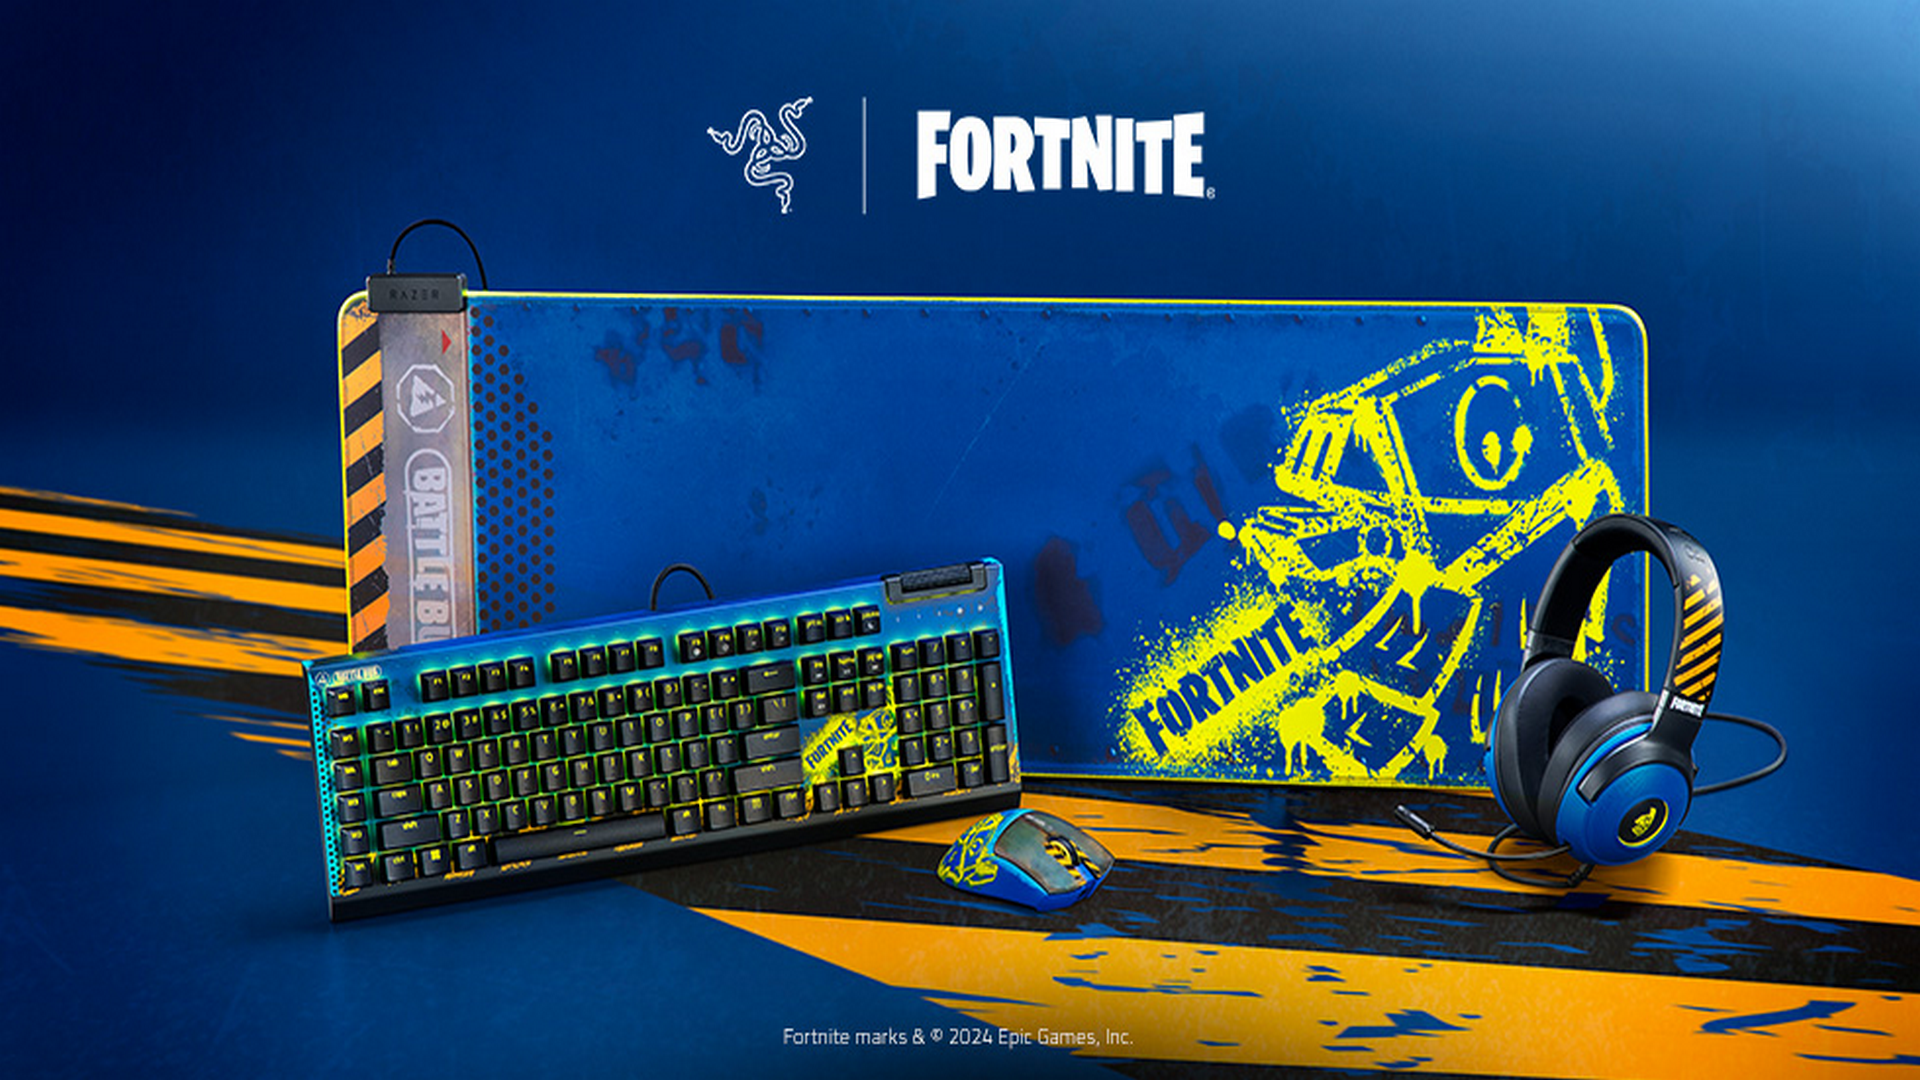 Celebrate Your Victory Royale In Style With The Razer x Fortnite PC Peripherals Collection